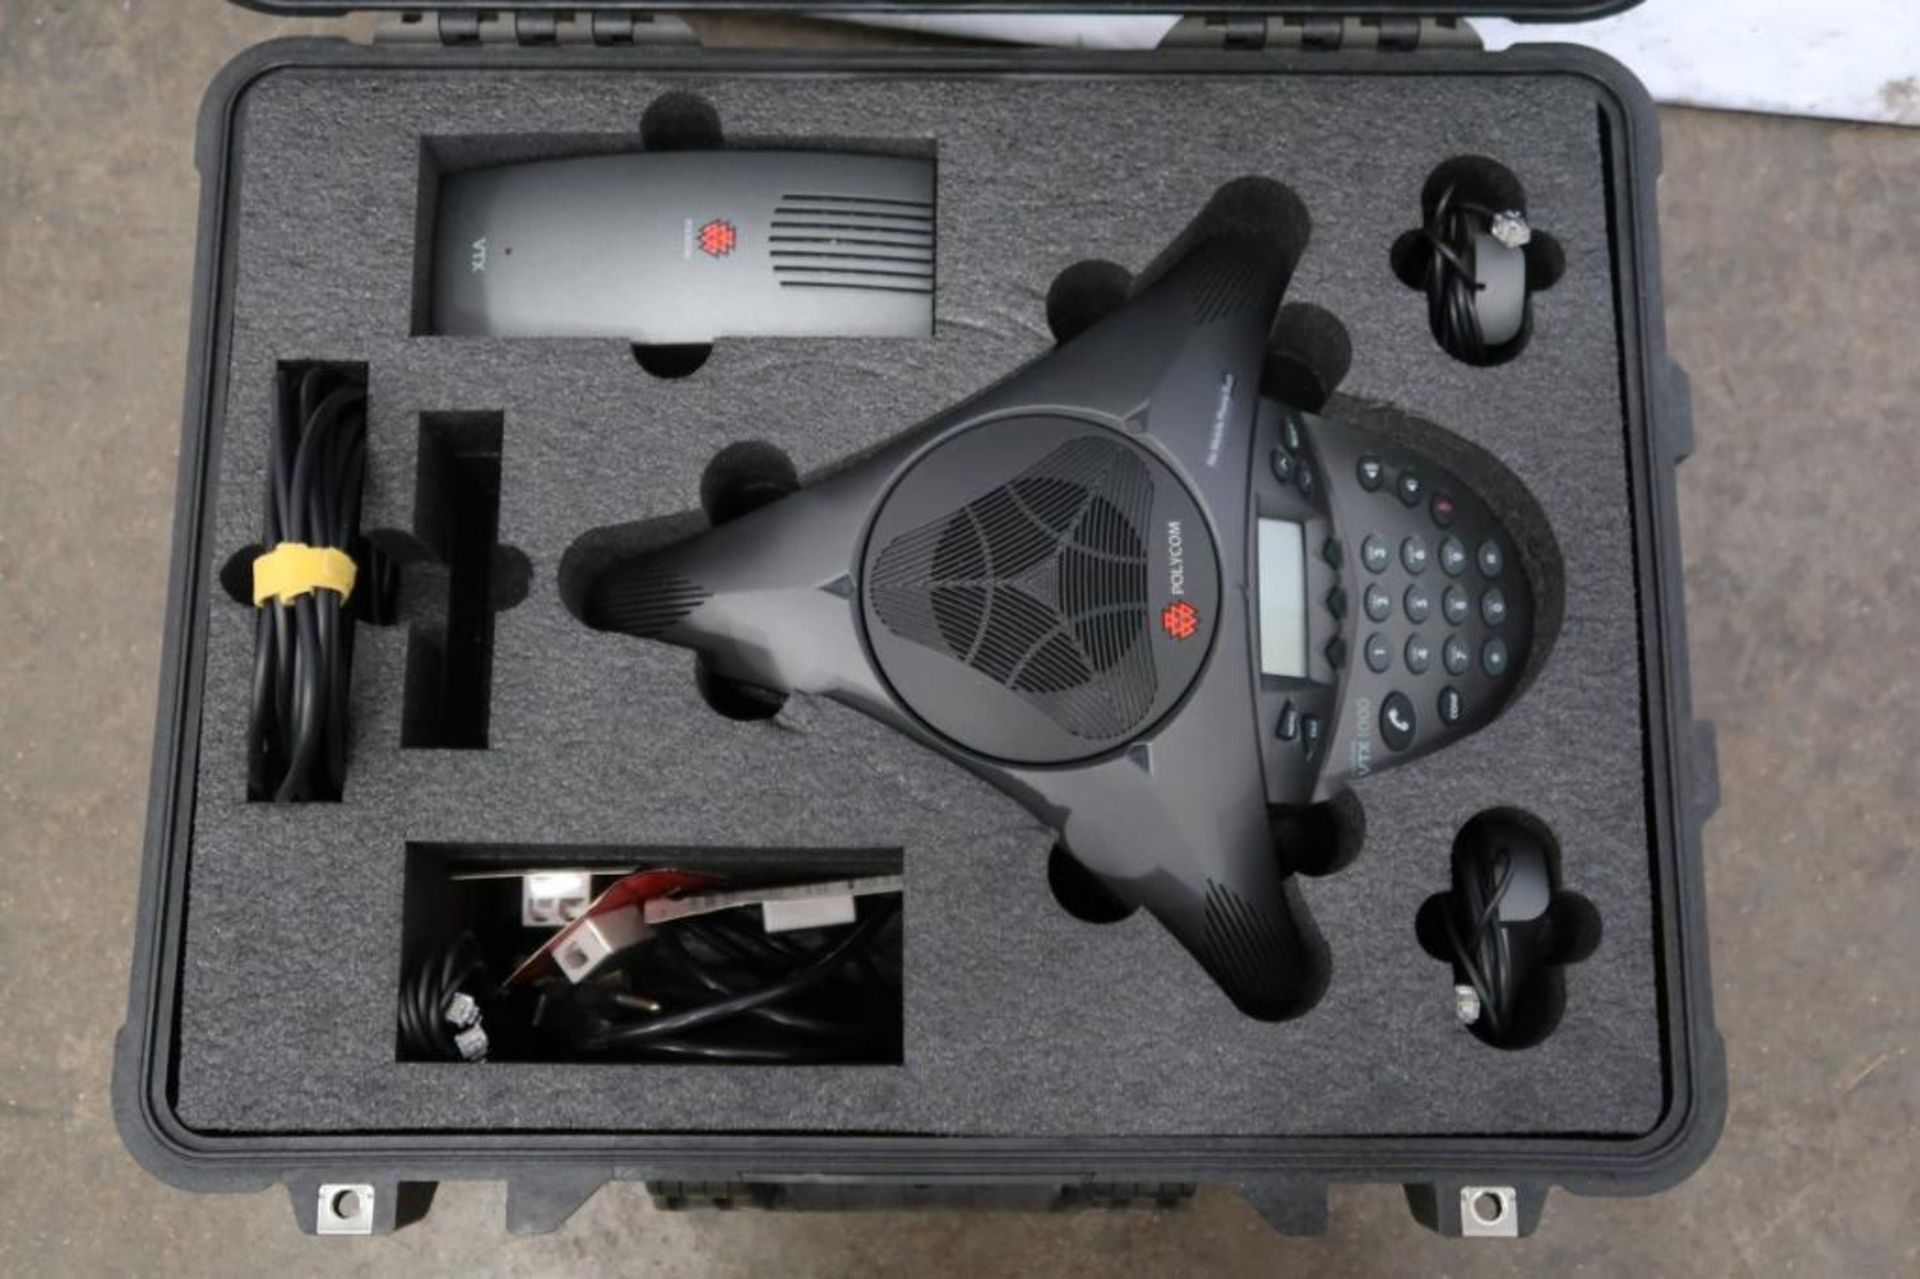 Polycom VTX1000 Phone Conference Phone with Pelican 1560 Hard Plastic Roller Case - Image 4 of 5